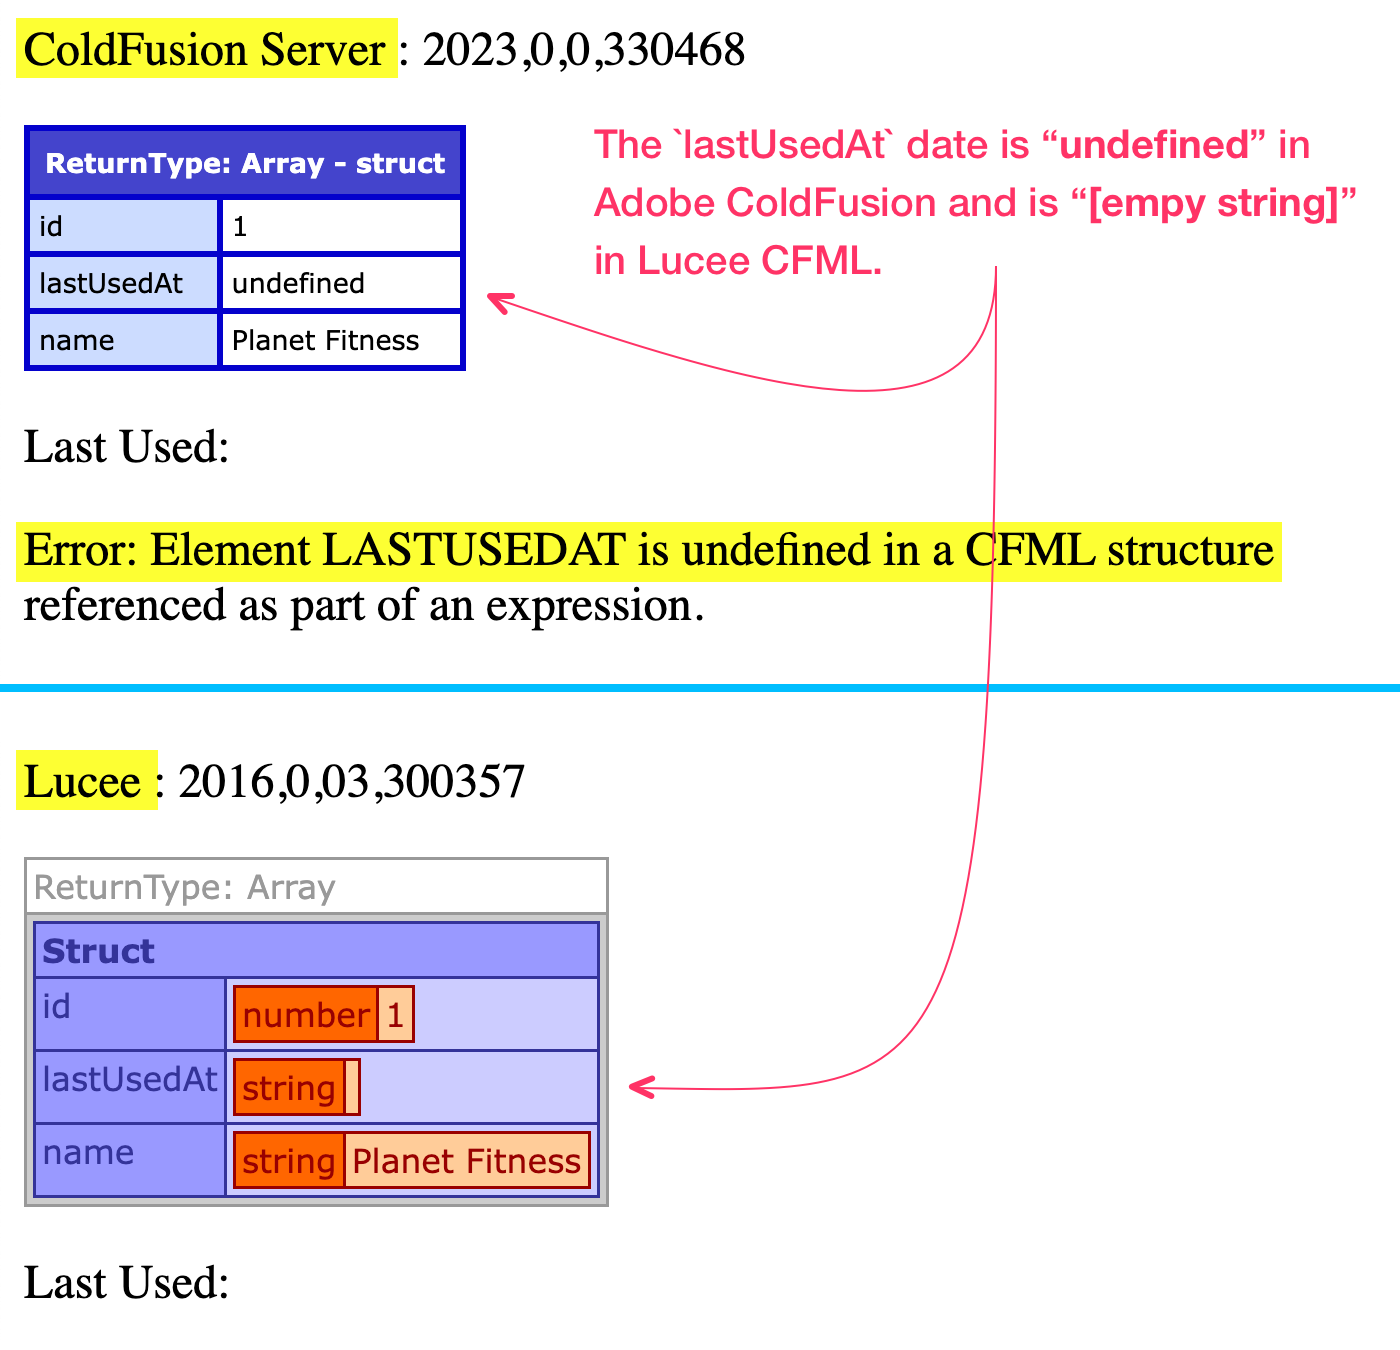 Null reference error caused by null date in Adobe ColdFusion, works fine in Lucee CFML.